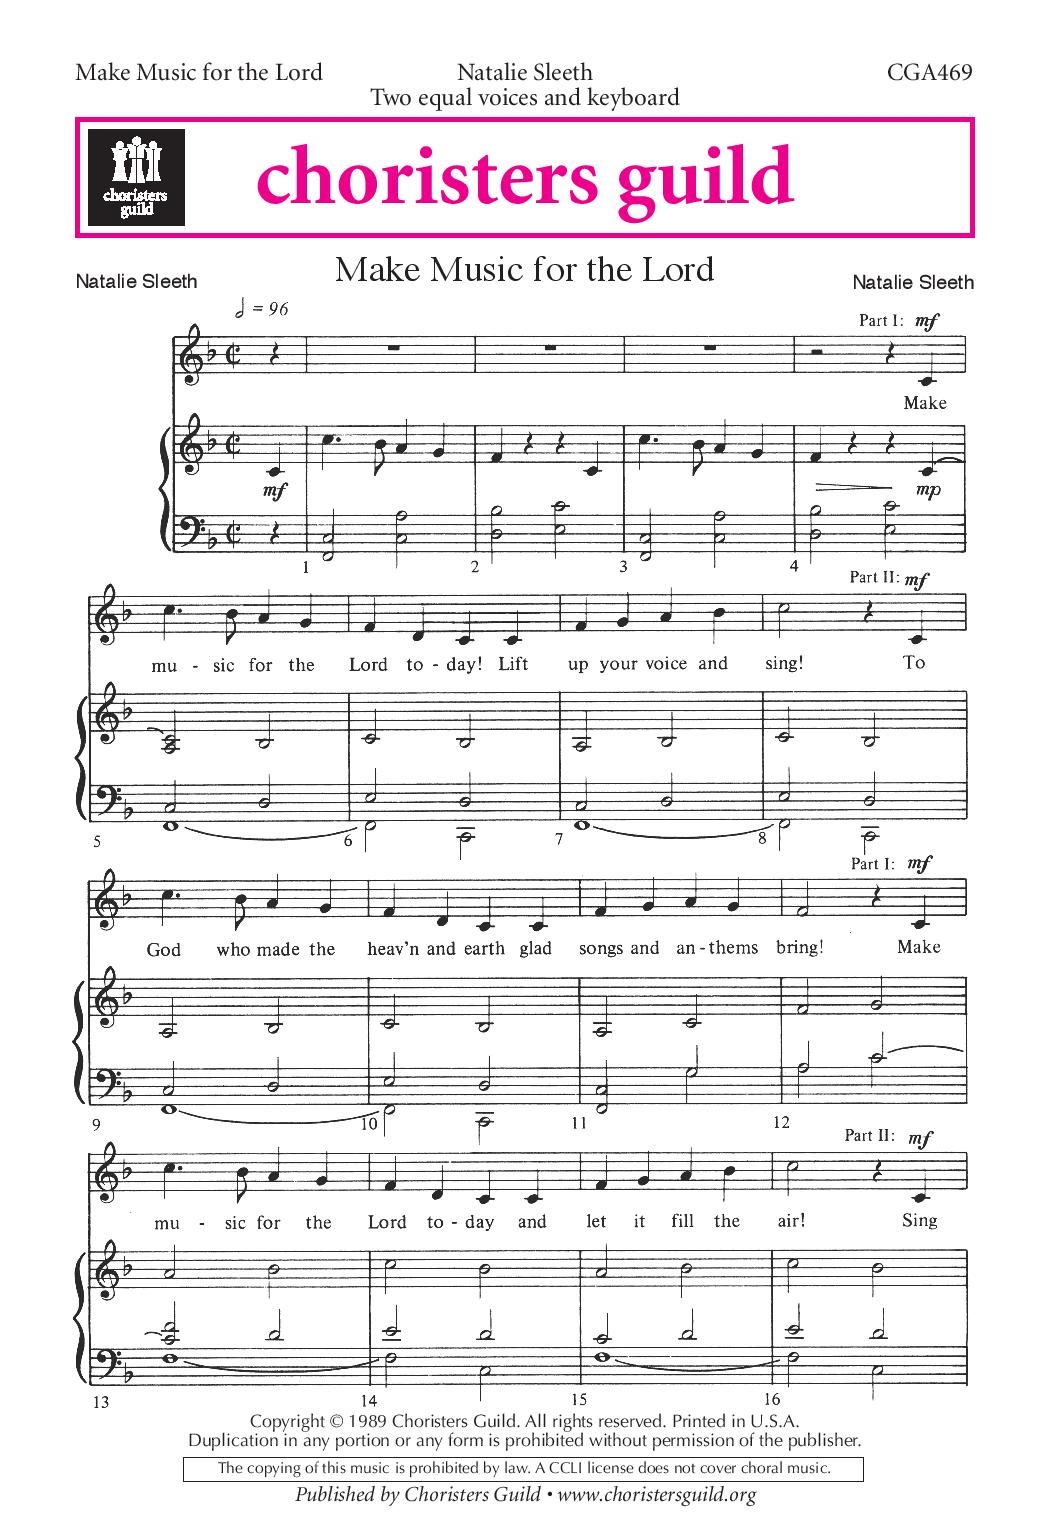 Make Music for the Lord